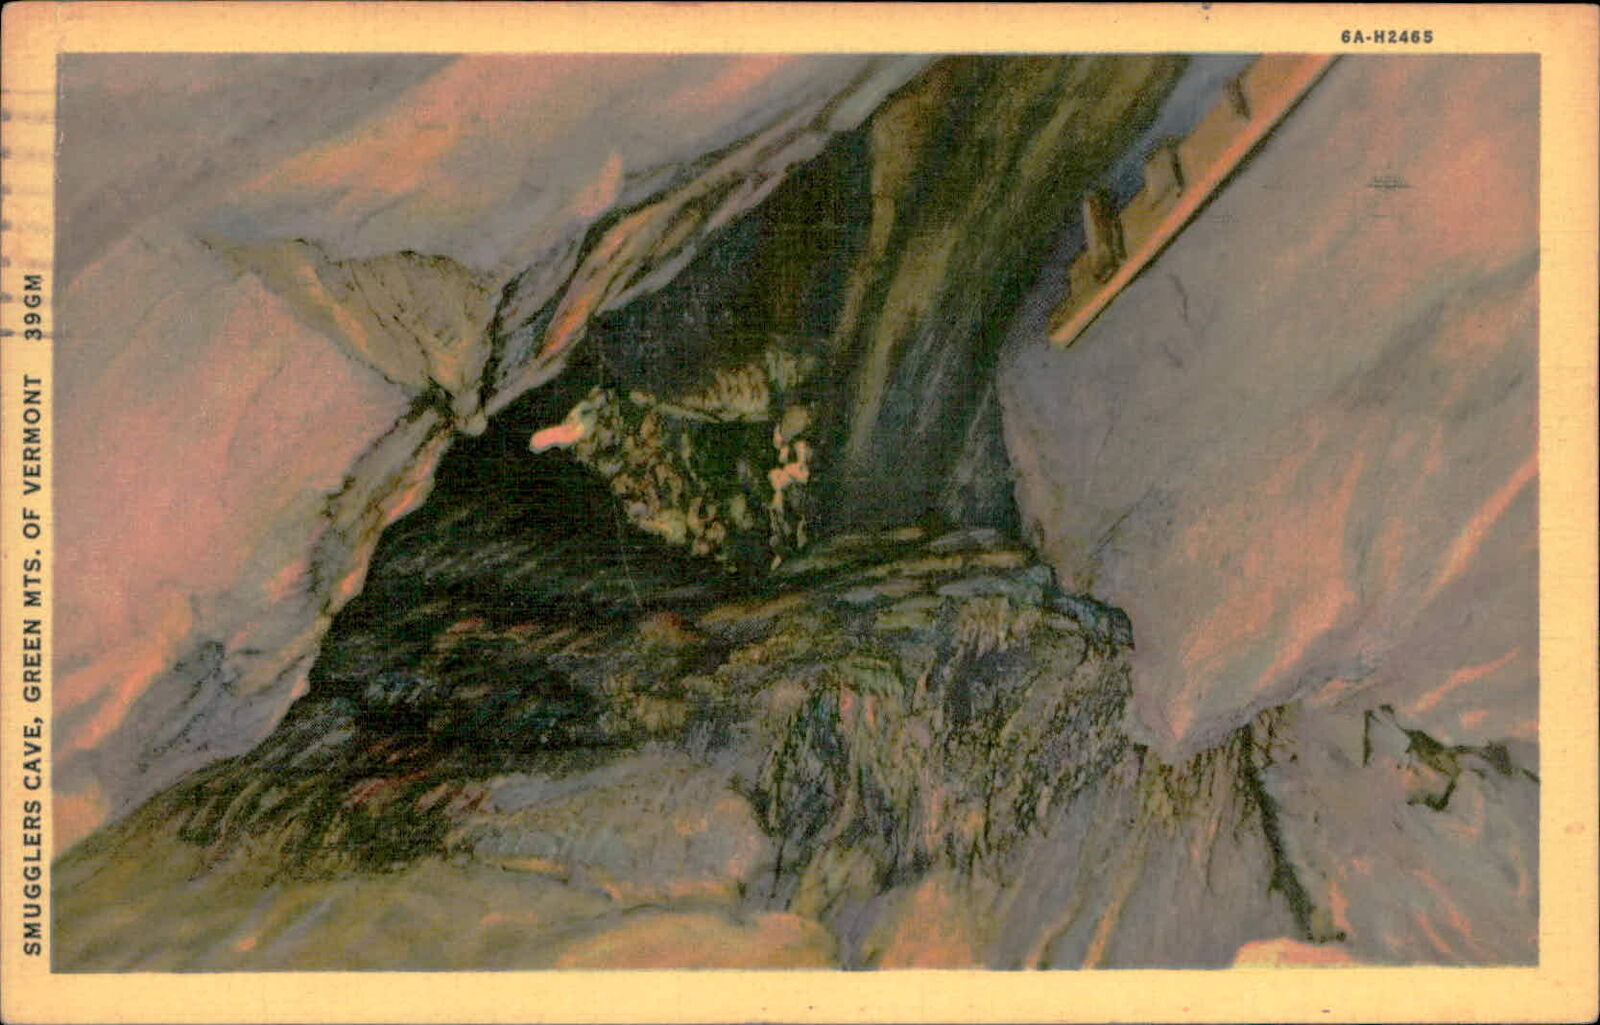 Postcard: SMUGGLERS CAVE, GREEN MTS. OF VERMONT 39GM 6A-H2465